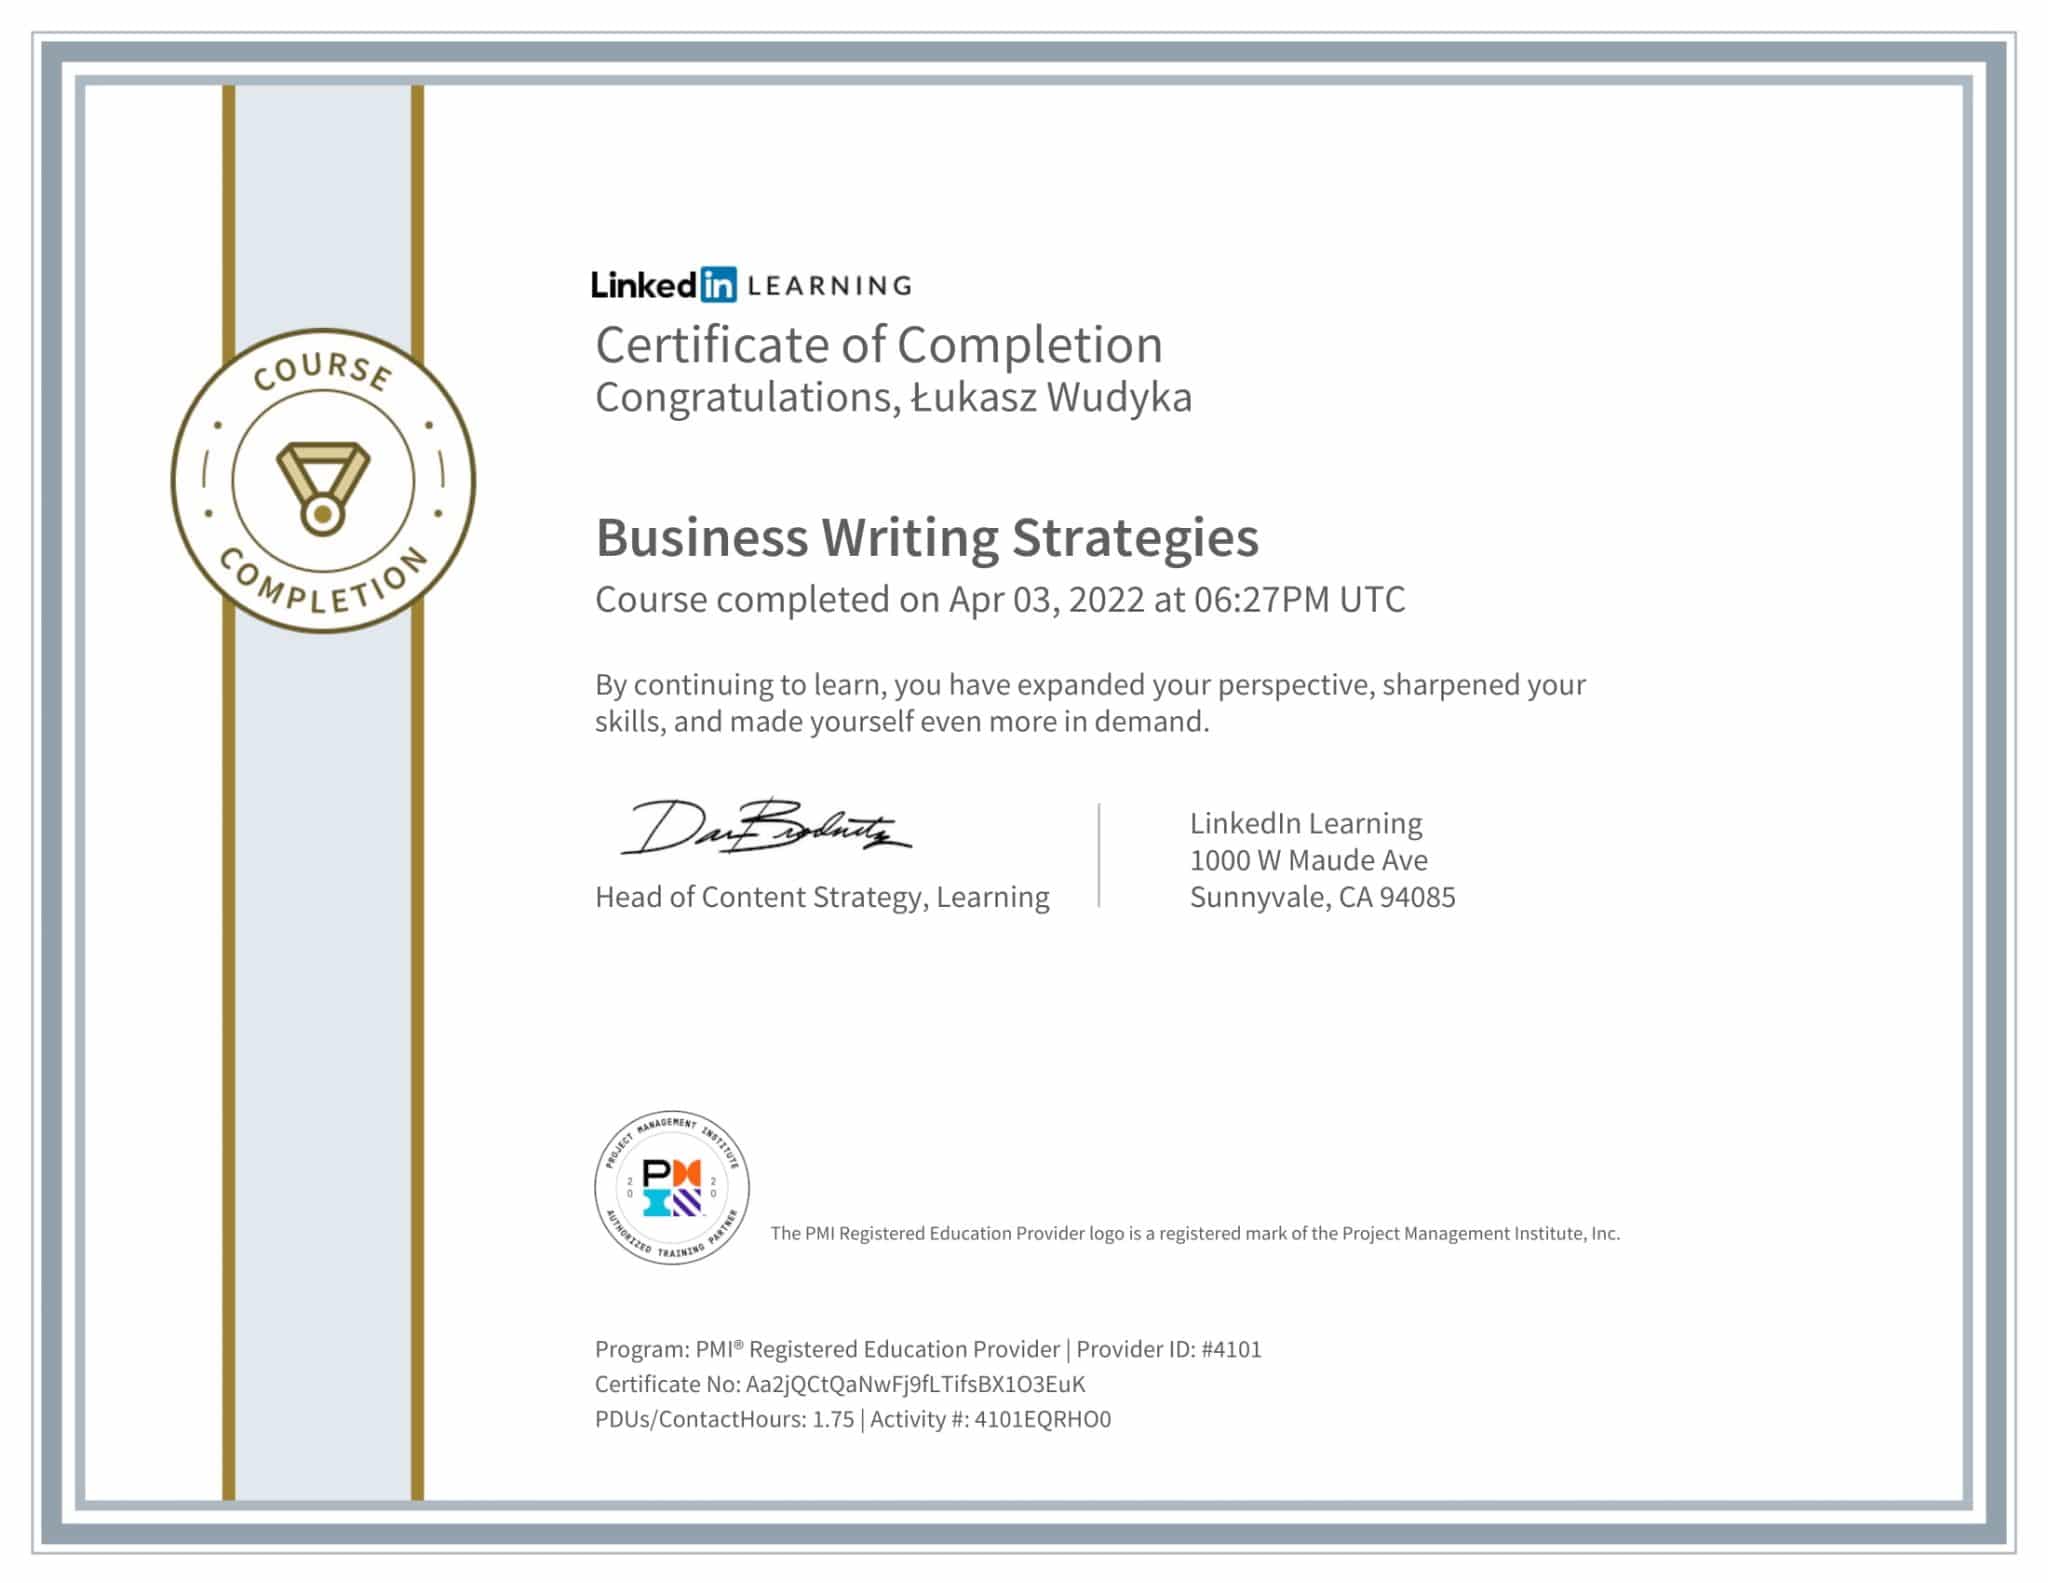 CertificateOfCompletion_Business Writing Strategies-1